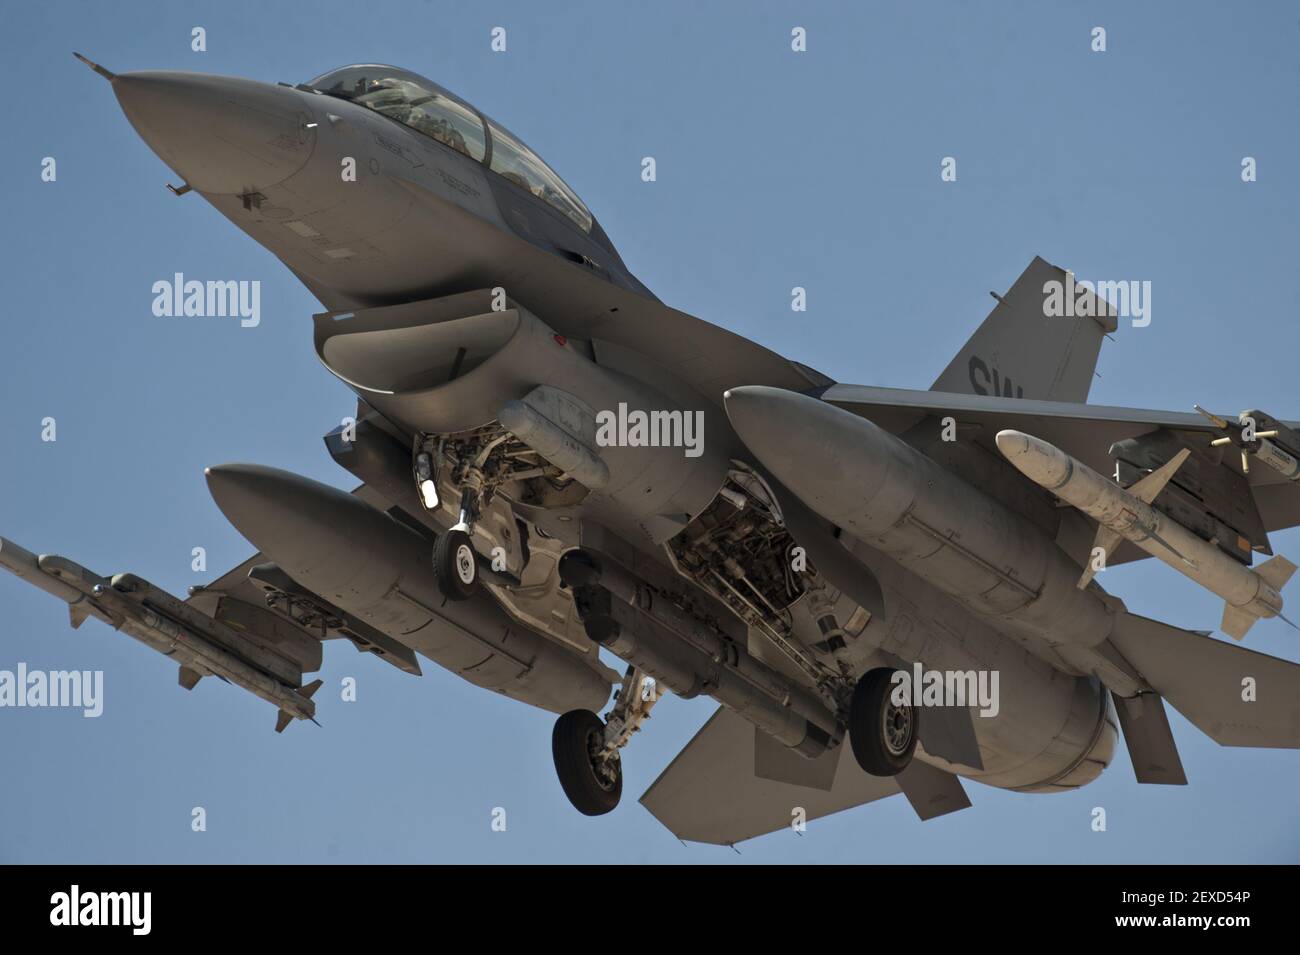 An F 16 Fighting Falcon Assigned To The 55th Fighter Squadron Flies During A Red Flag 15 3 Sortie At Nellis Air Force Base Nev July 17 15 Red Flag Provides A Series Of